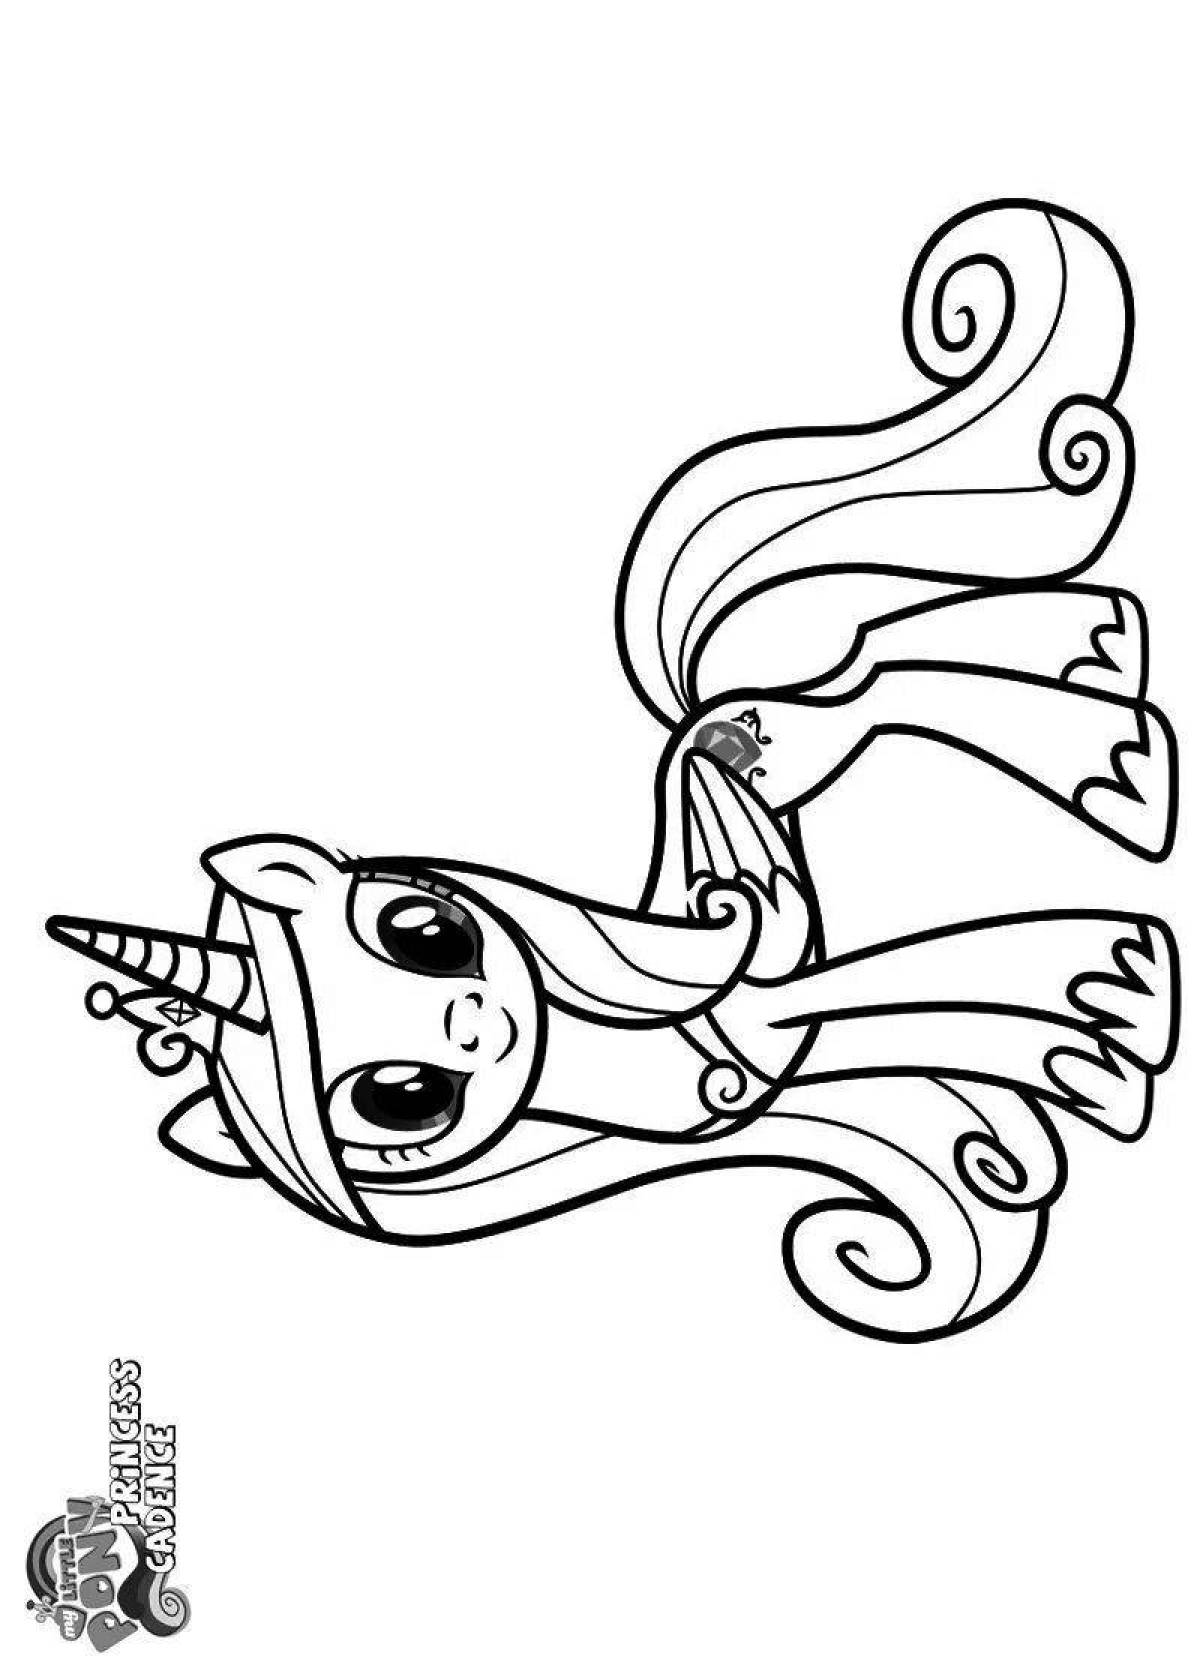 Glowing cadence coloring page